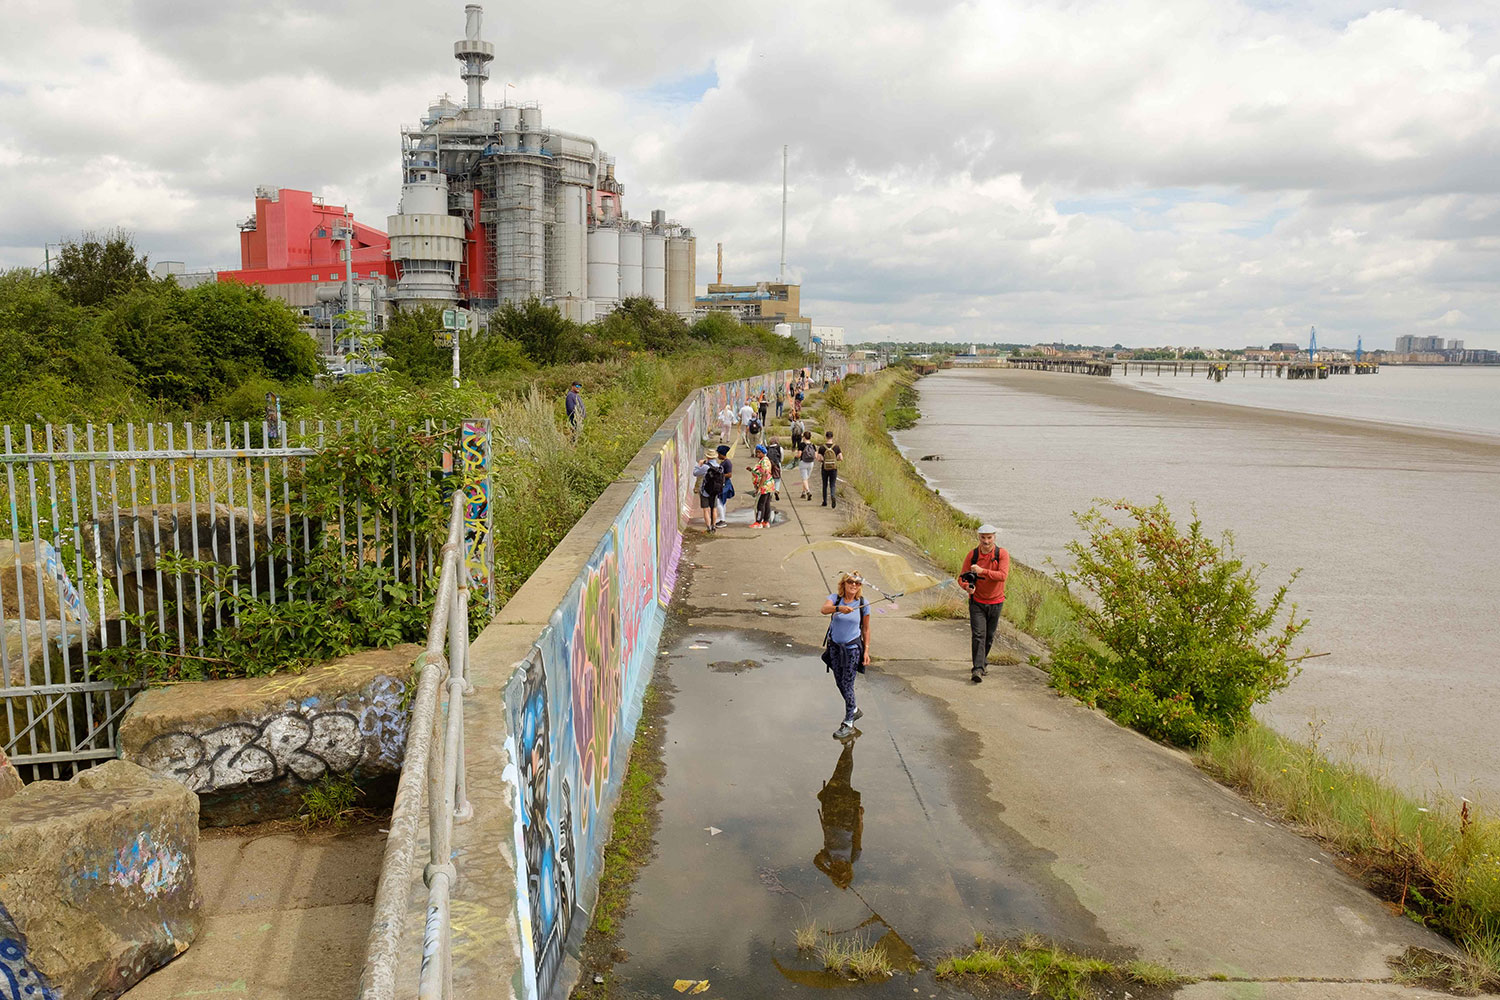 Walkers approach along the graffiti wall between a large factory on the left and the Thames river on the right